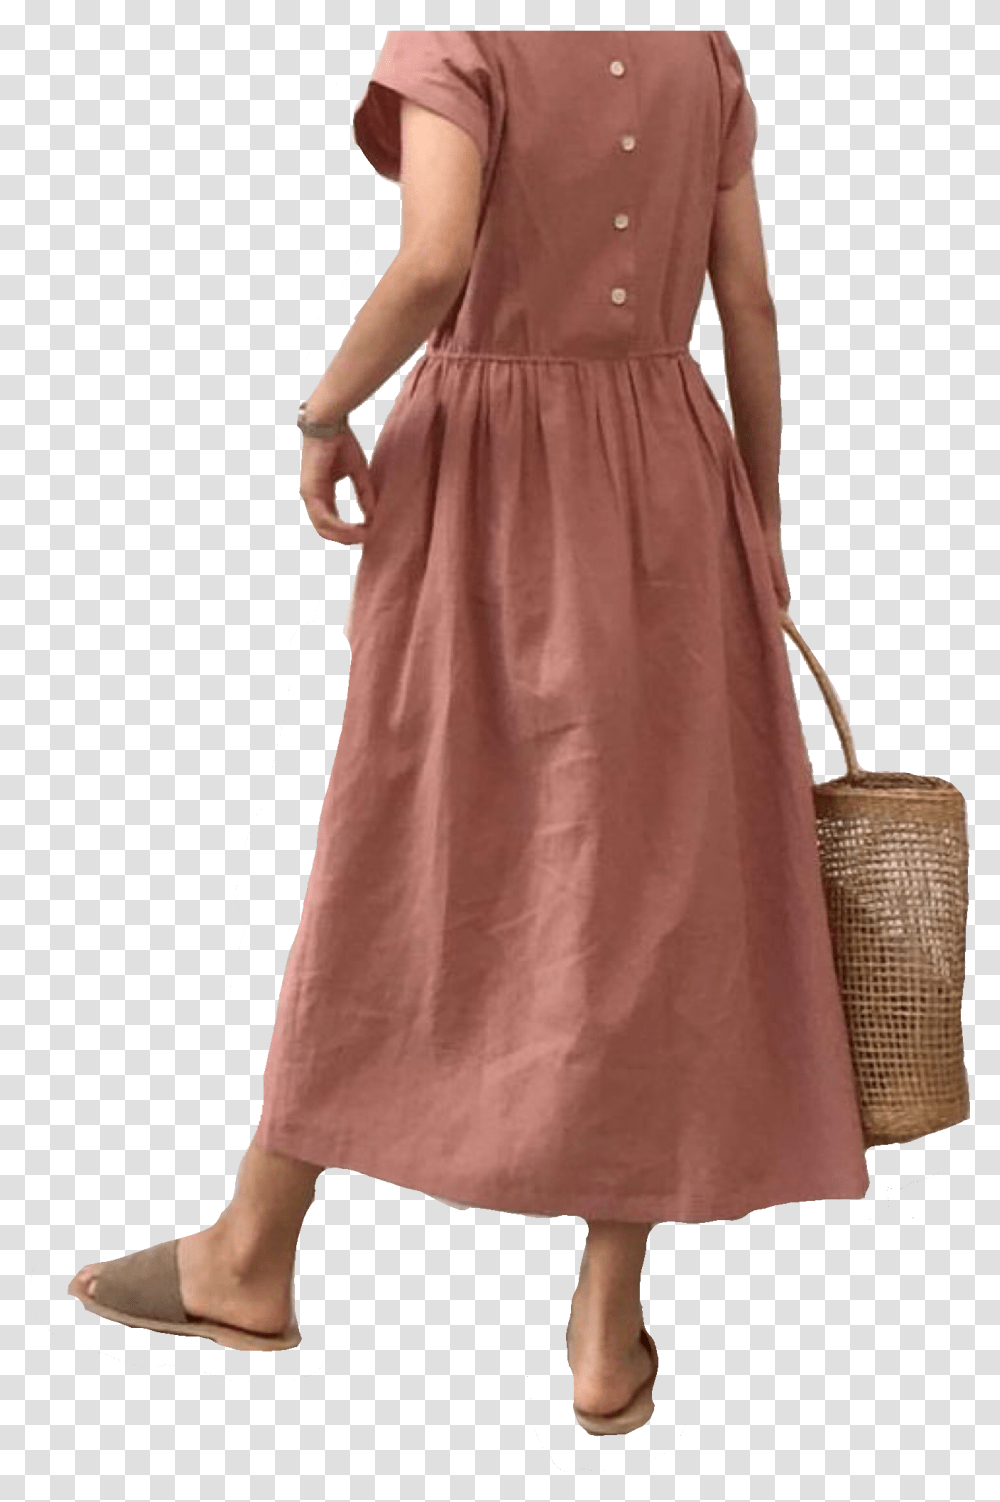 Dress Dress Skirt Pink Skirts Mbs Pink Outfits Gown, Apparel, Female, Person Transparent Png